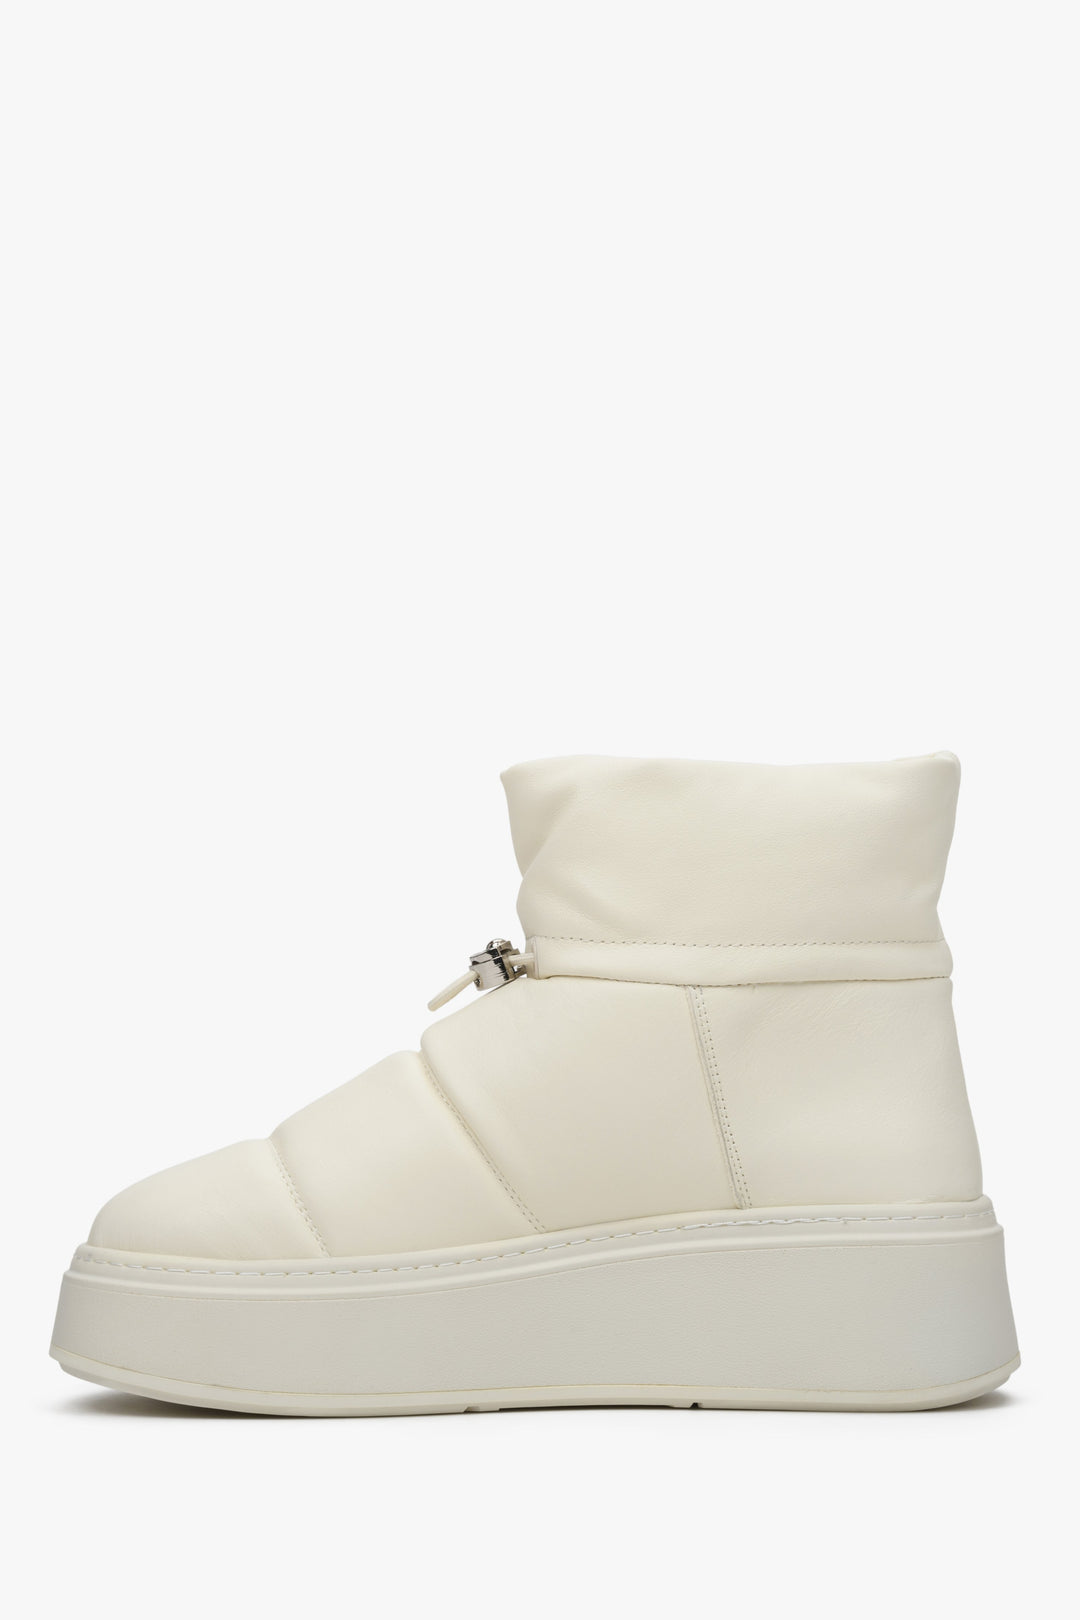 Winter women's snow boots by Estro with a cuff in white color.